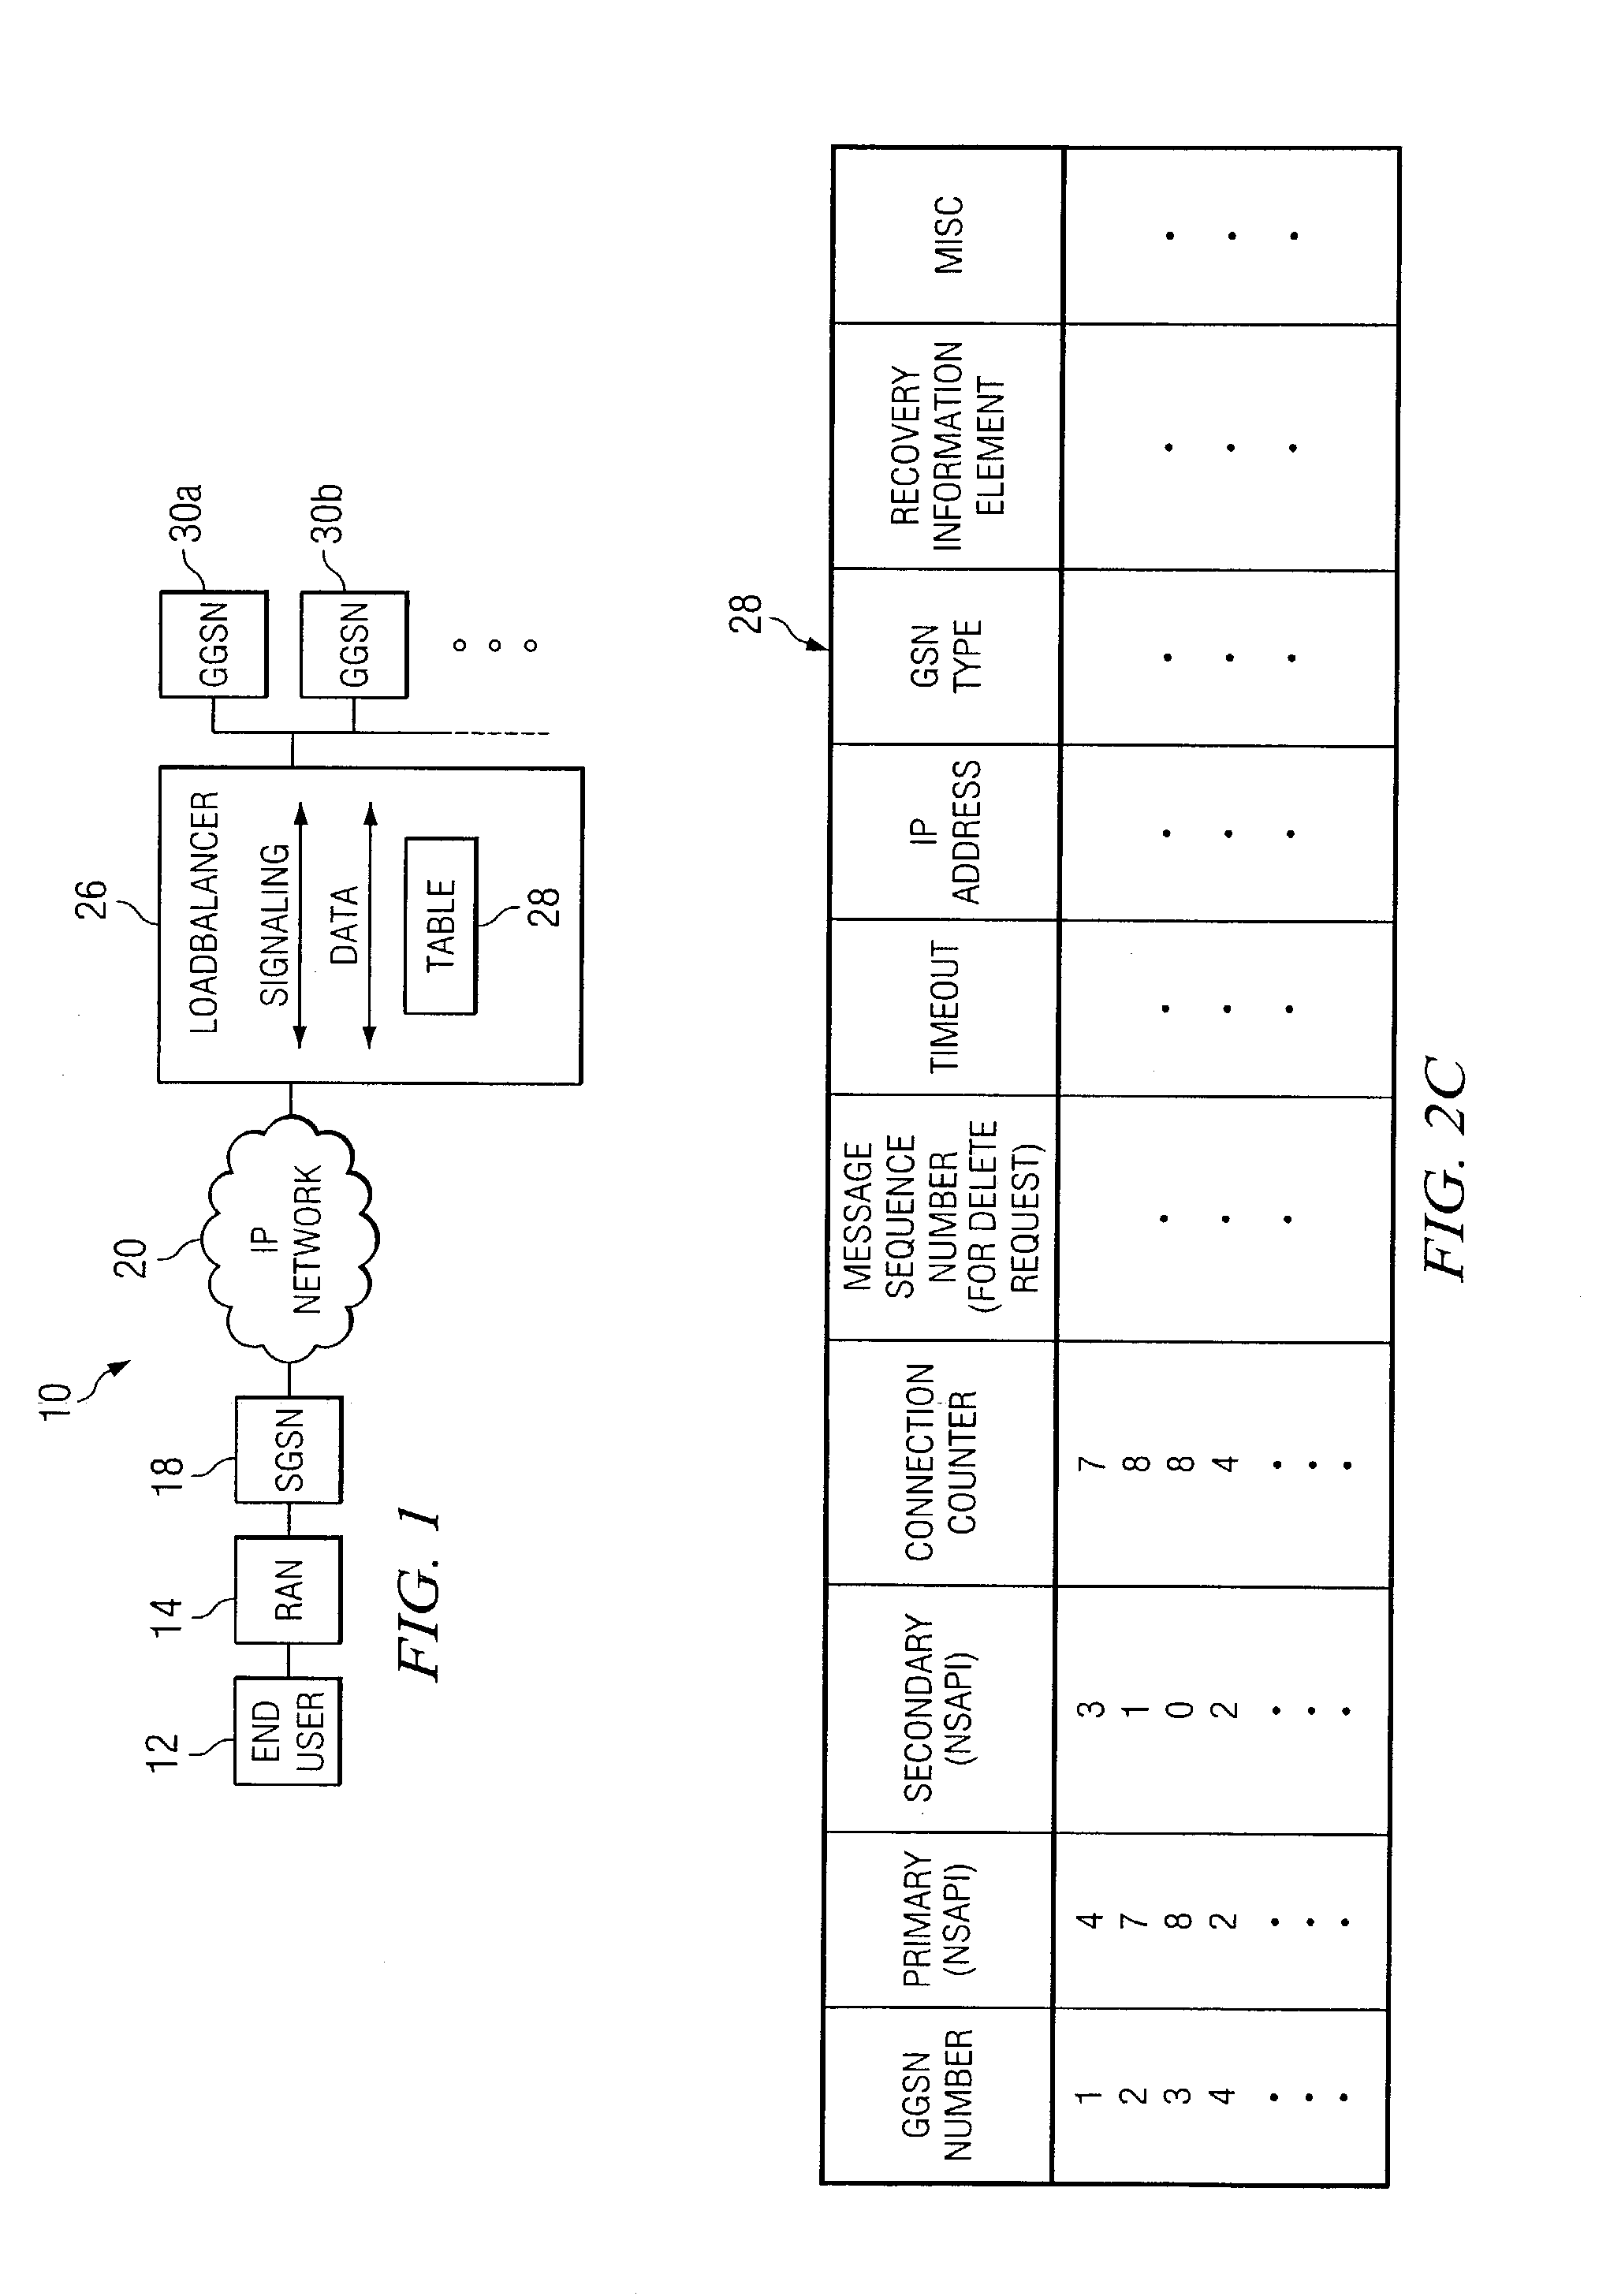 System and method for loadbalancing in a network environment